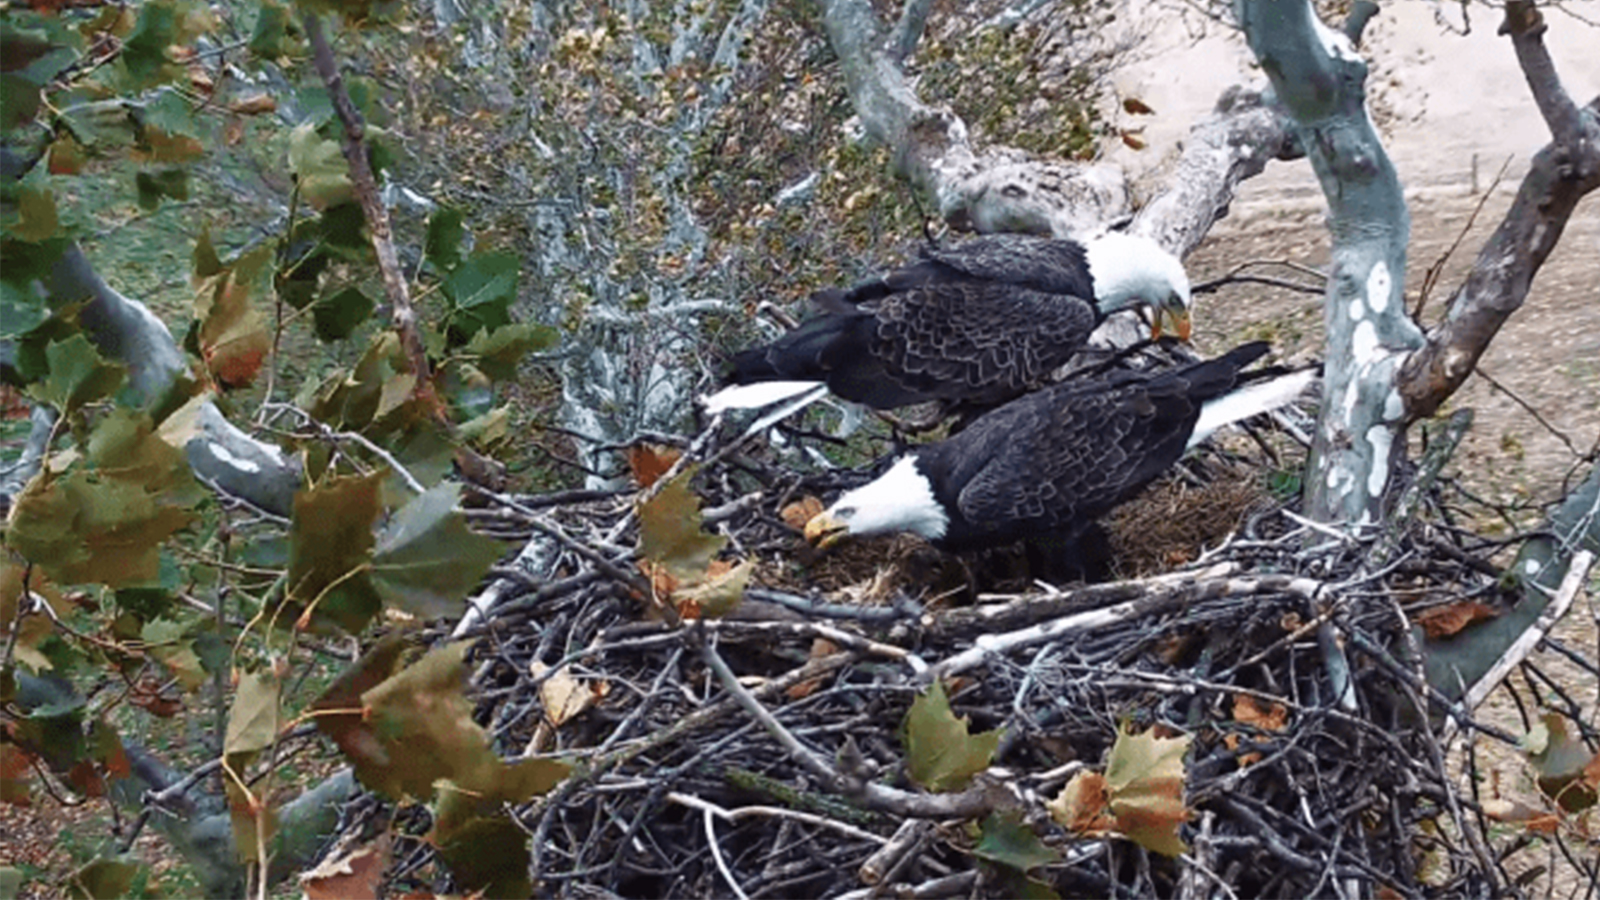 Two bald eagles in a nest.